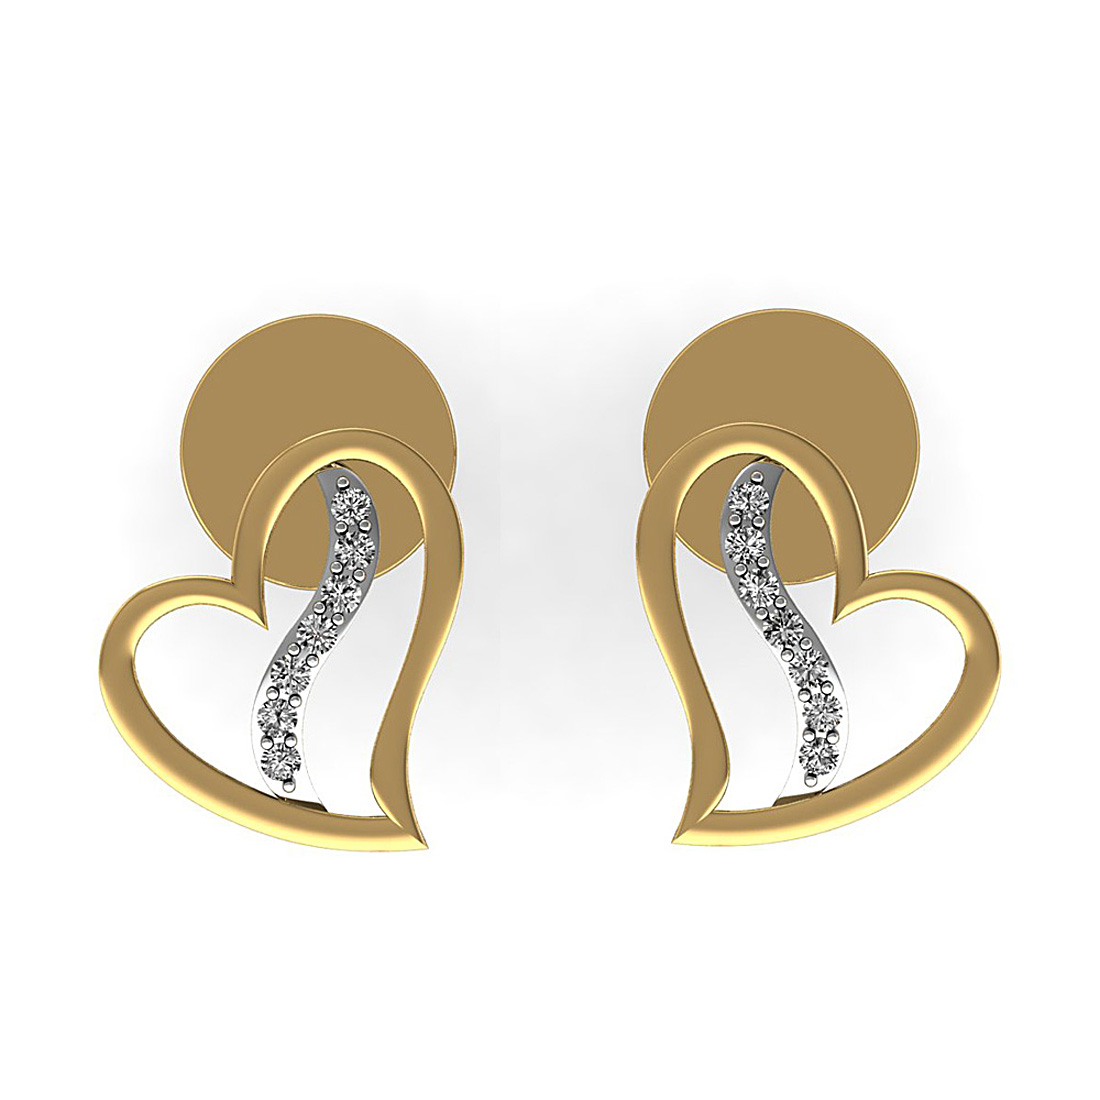 Natural diamond heart stud earrings made in 18k solid gold